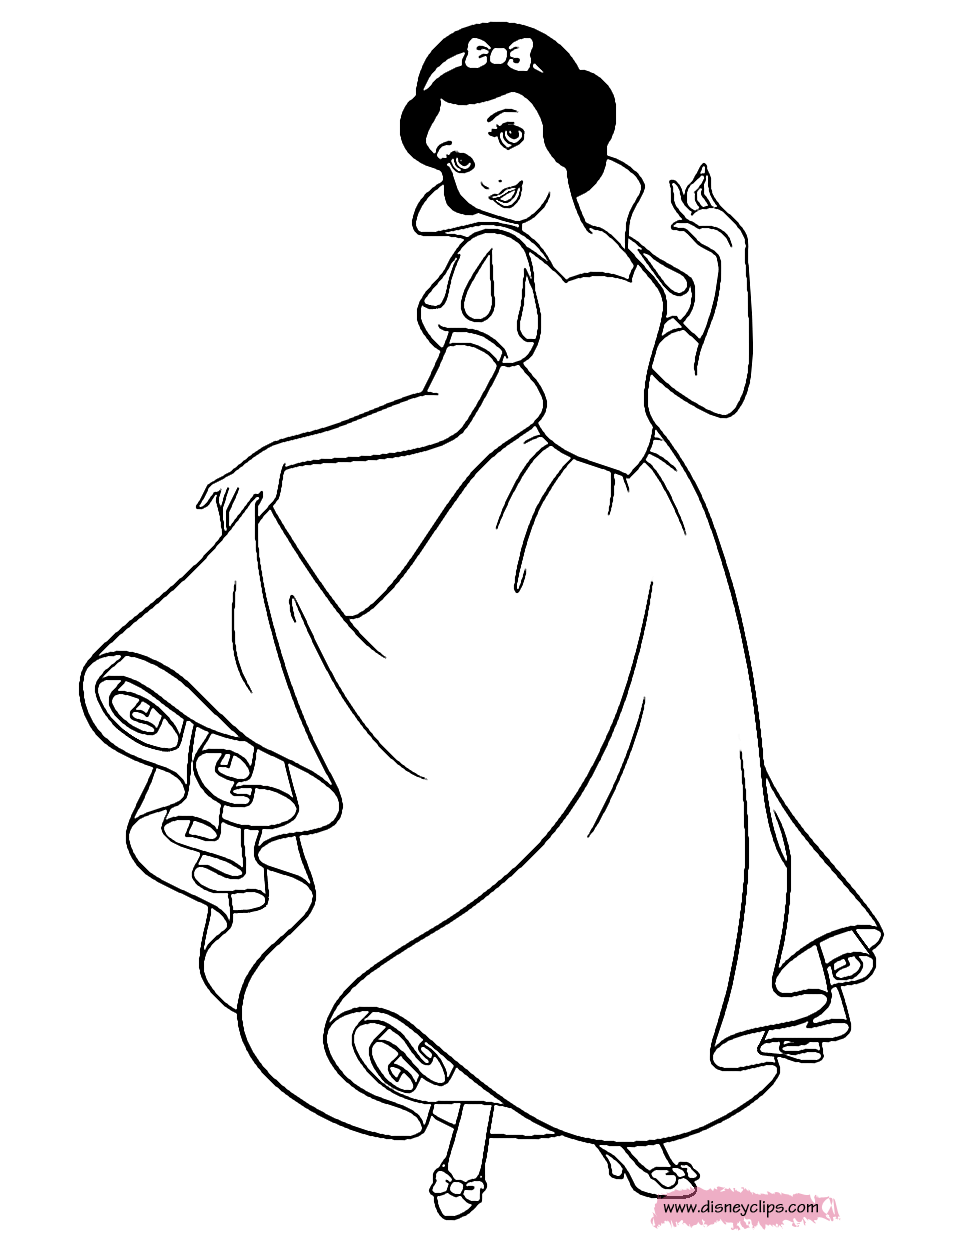 Snow White and the Seven Dwarfs Coloring Pages 2   Disneyclips.com